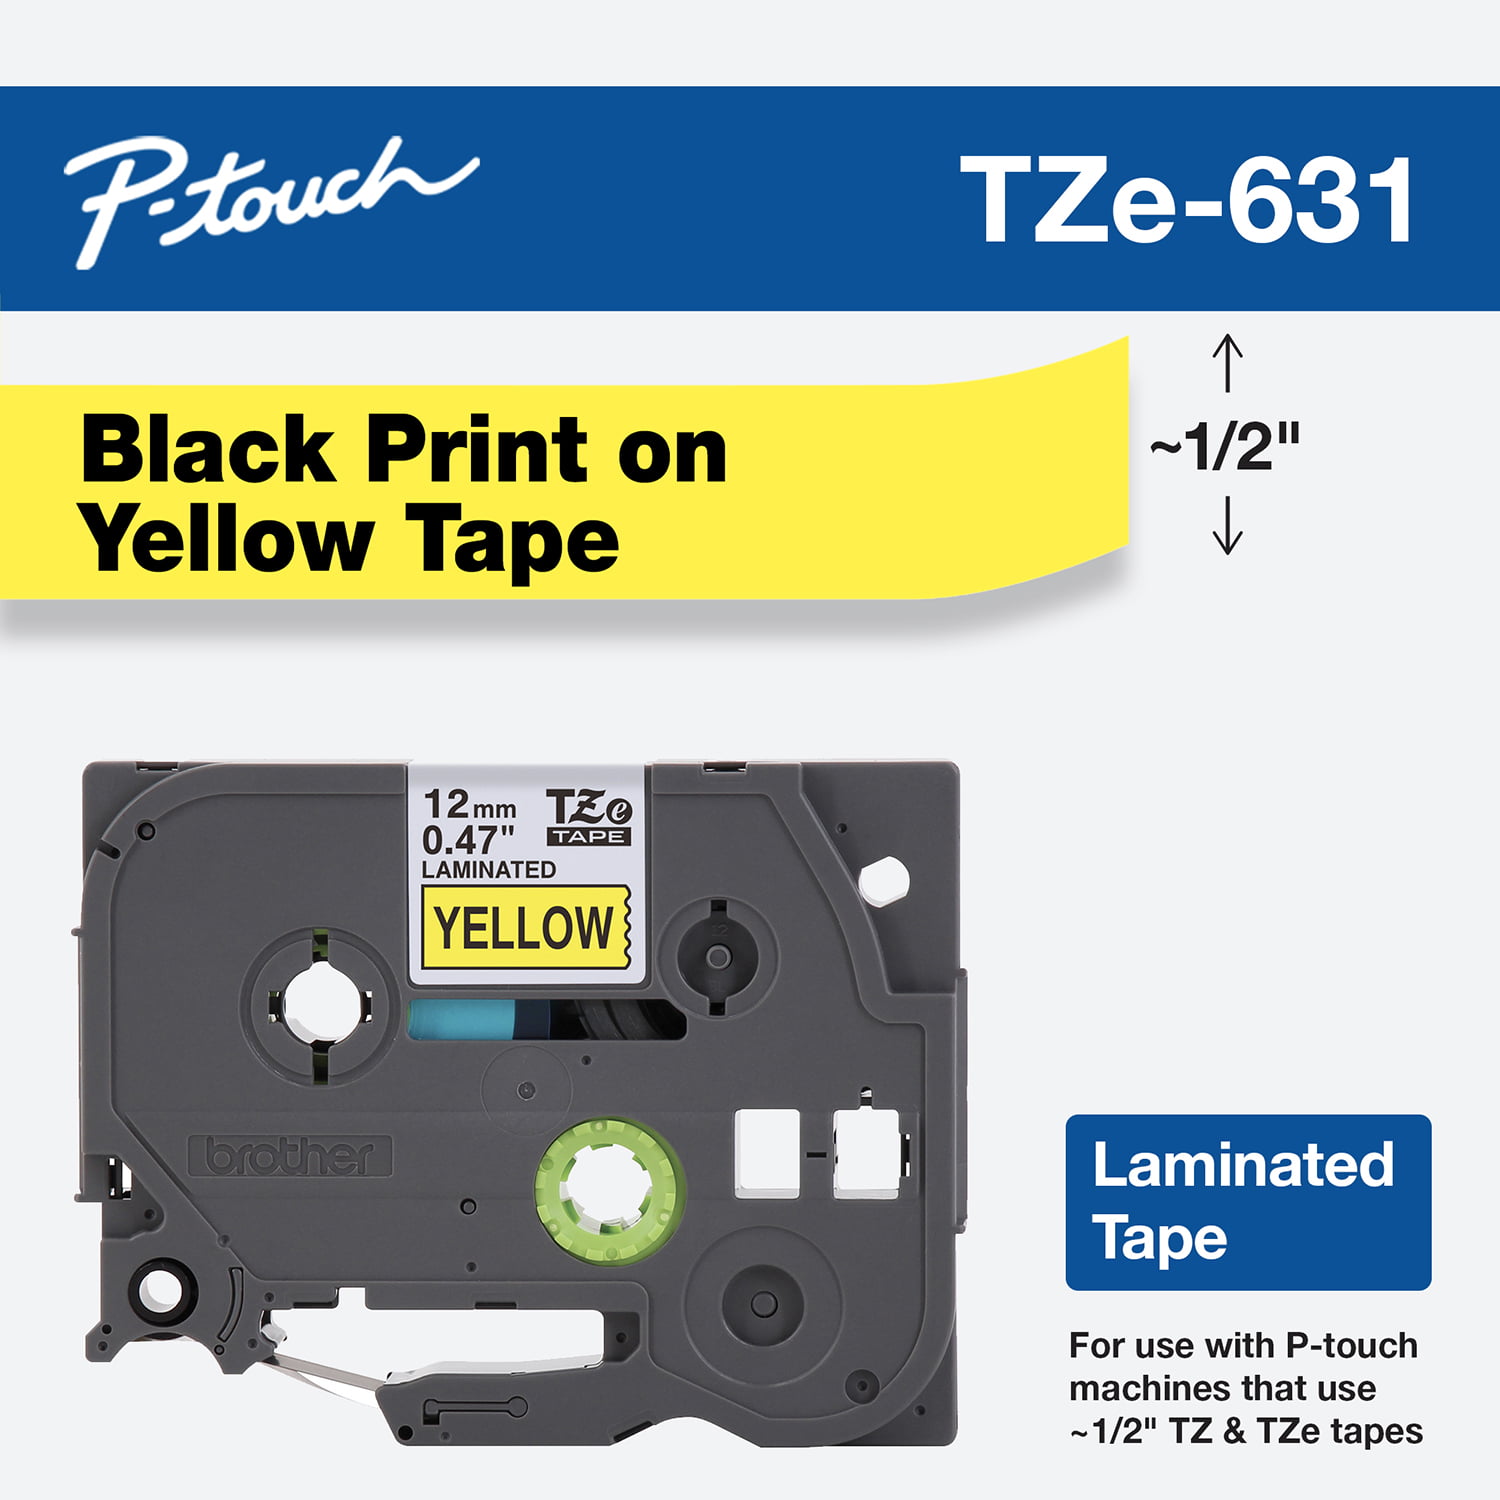 10PK Black on Yellow Label Tape For Brother TZ TZe 631 Tze631 P-Touch 12mm 1/2" 